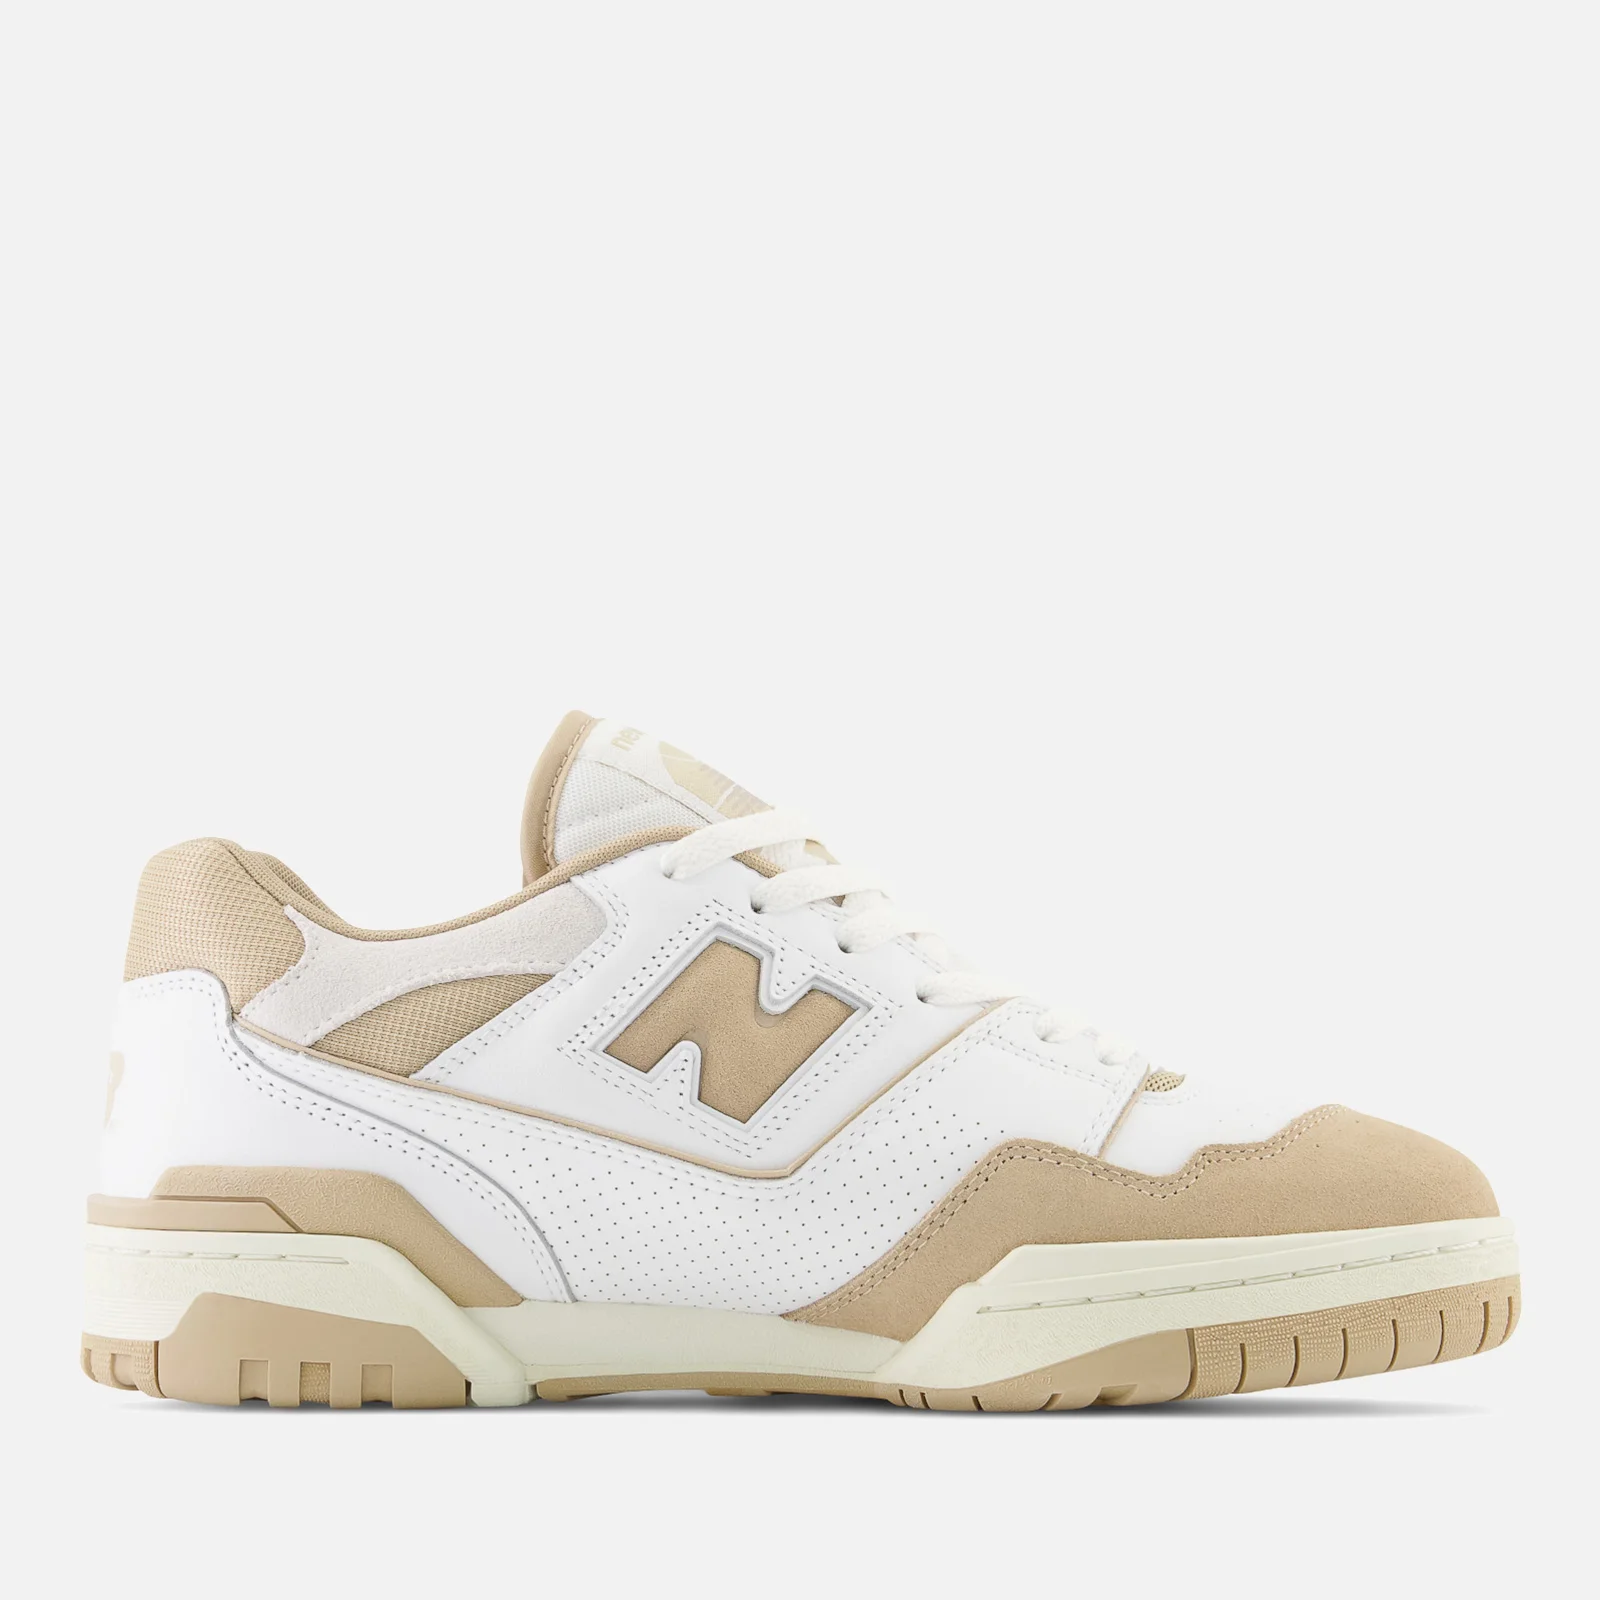 New Balance 550 Leather and Nubuck Trainers Image 1